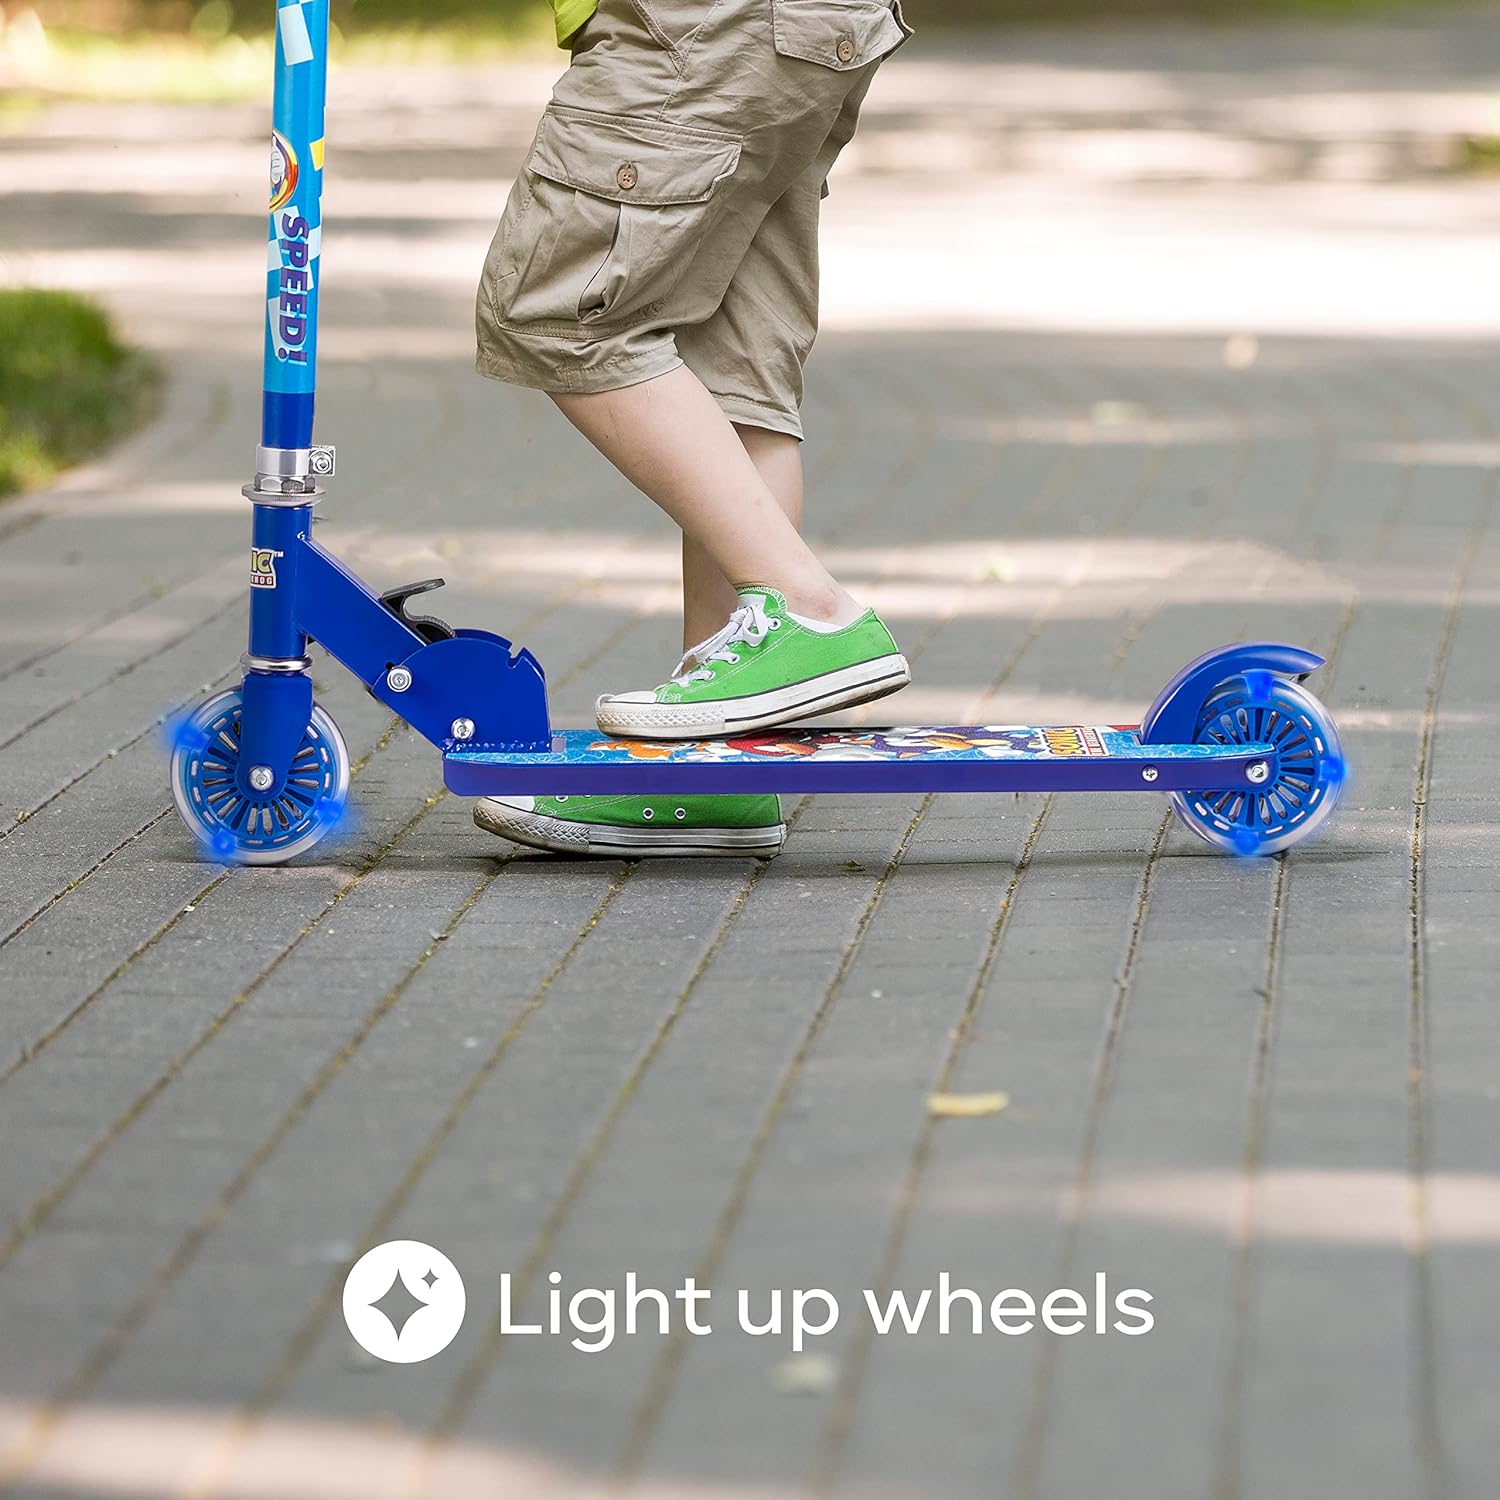 2 Wheel Kick Scooter for Kids - Easy & Portable Fold-N-Carry Design, Ultra-Lightweight, Comfortable & Safe, Durable & Easy to Ride